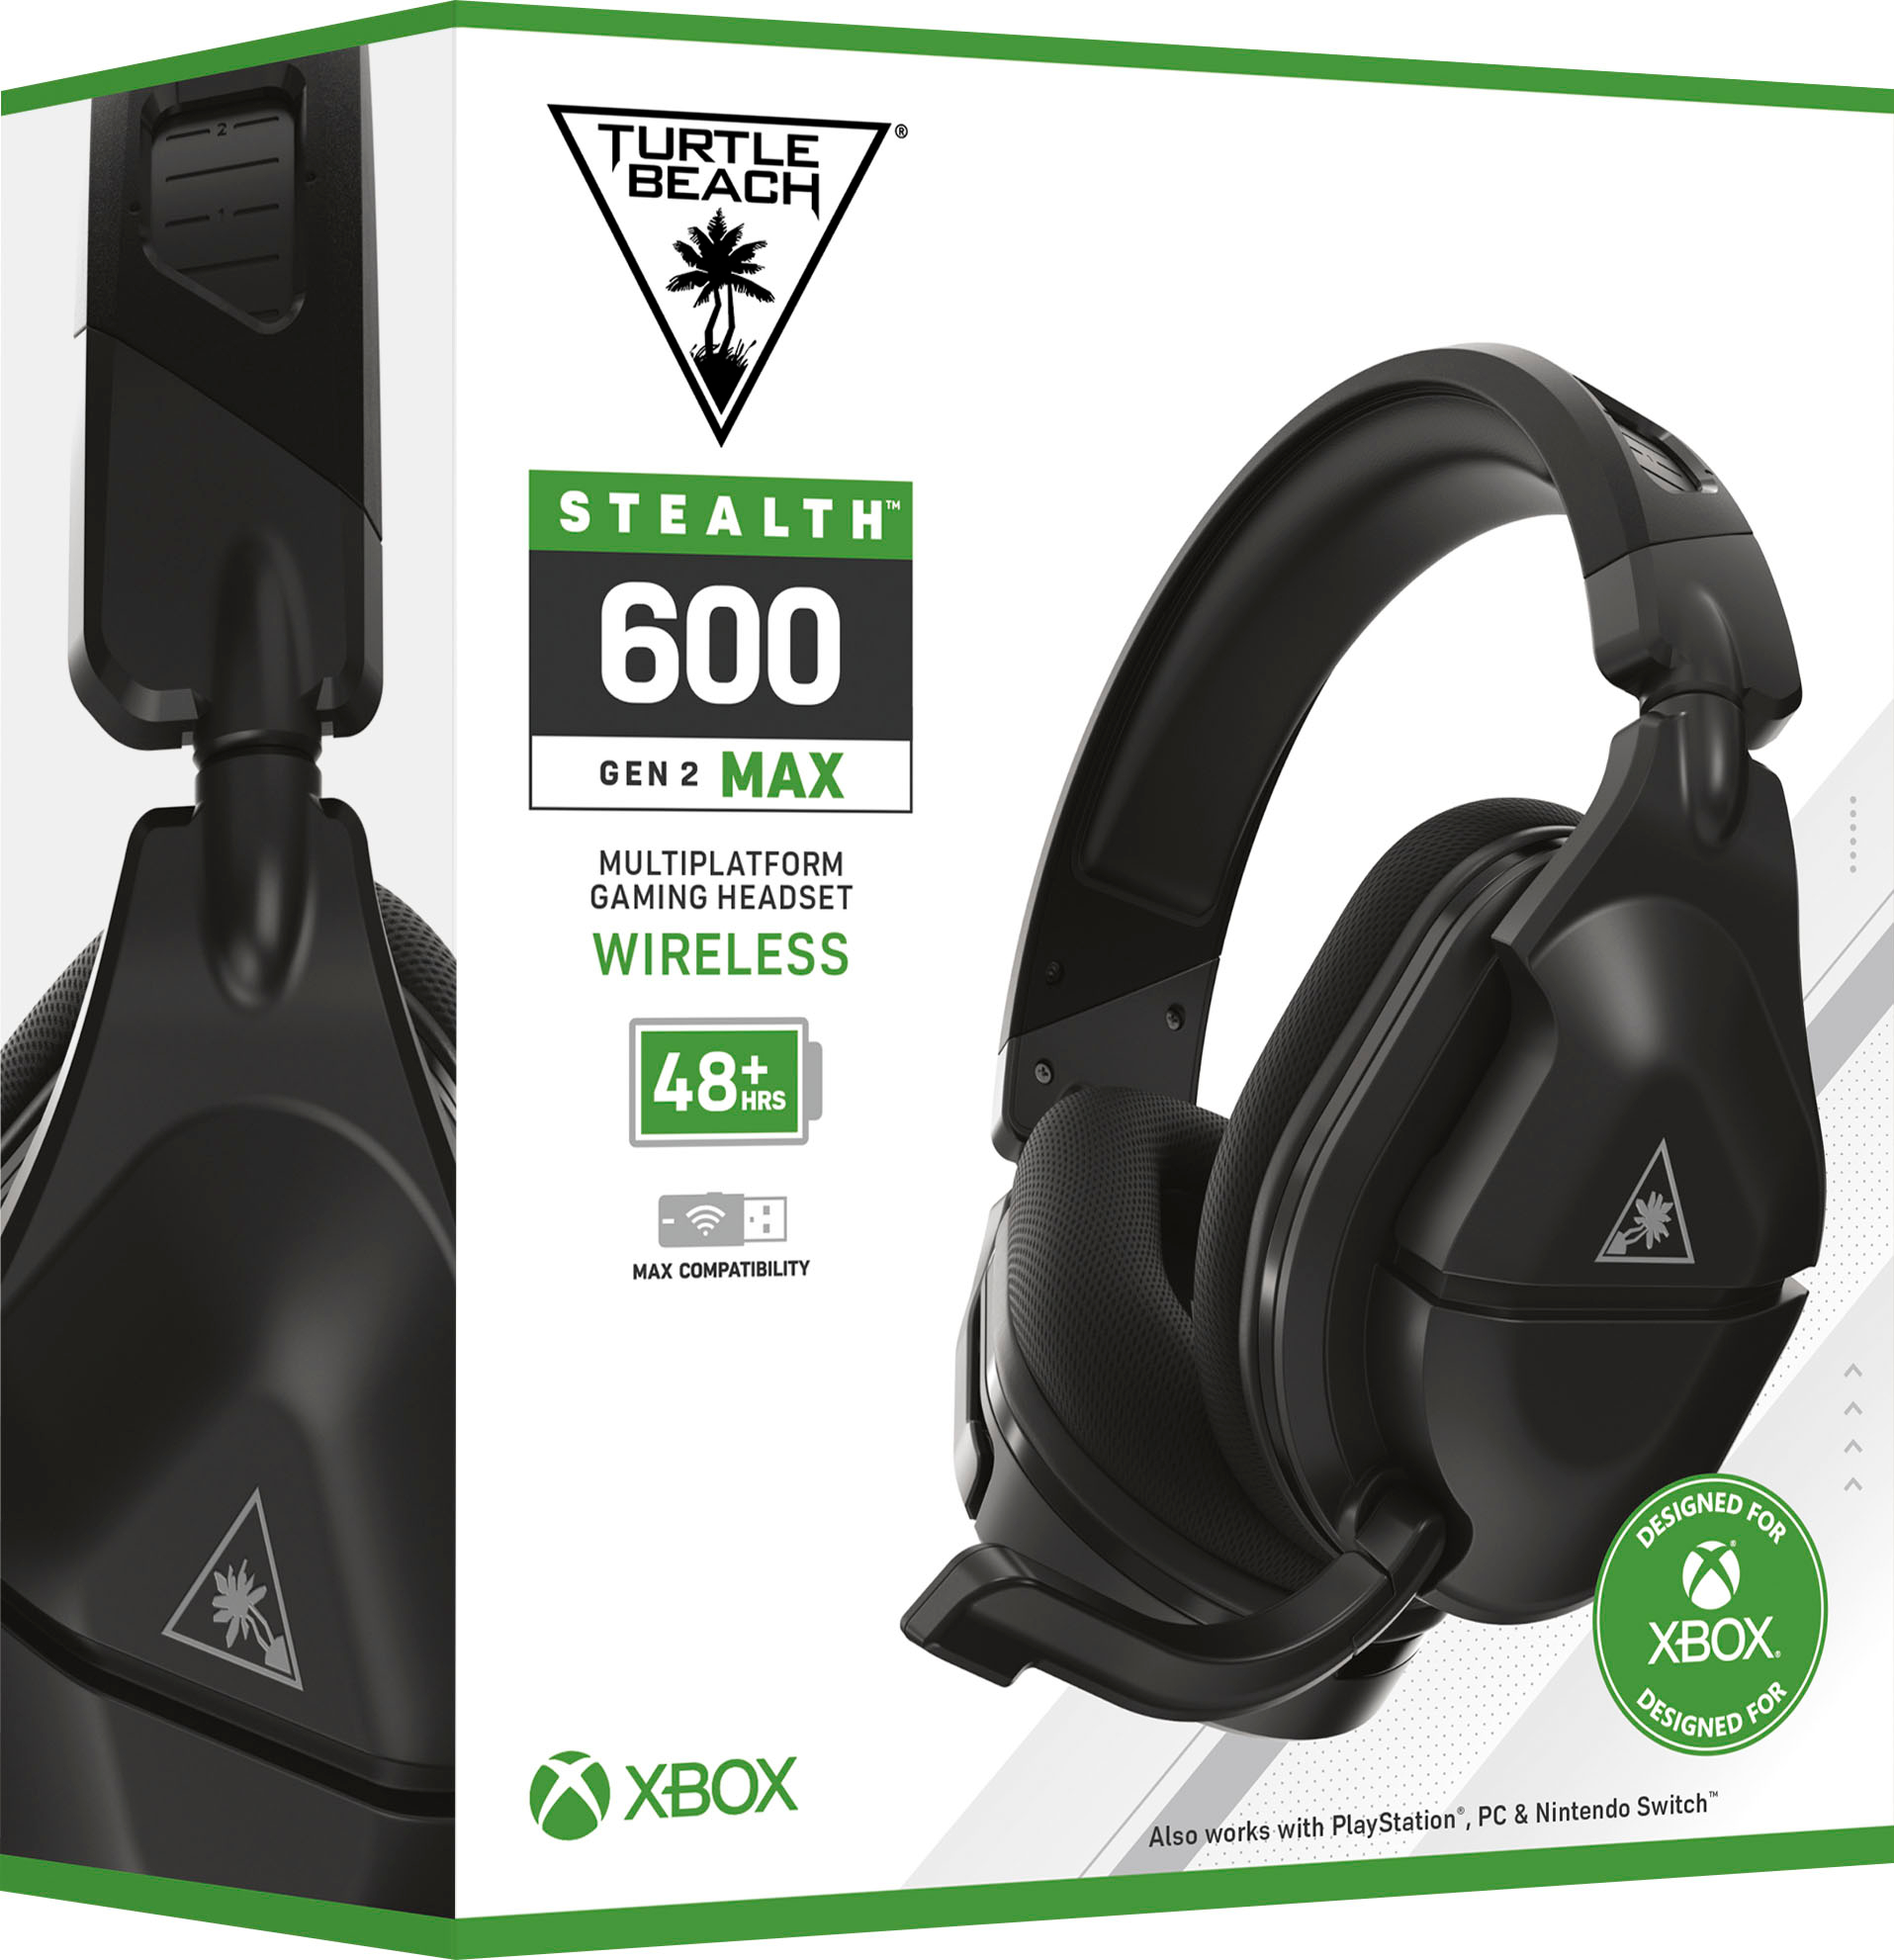 Bermad beklimmen Super goed Turtle Beach Stealth 600 Gen 2 MAX Wireless Multiplatform Gaming Headset  for PC, Xbox X|S, PS5, PS4, Switch 48 Hour Battery Black TBS-2362-01 - Best  Buy